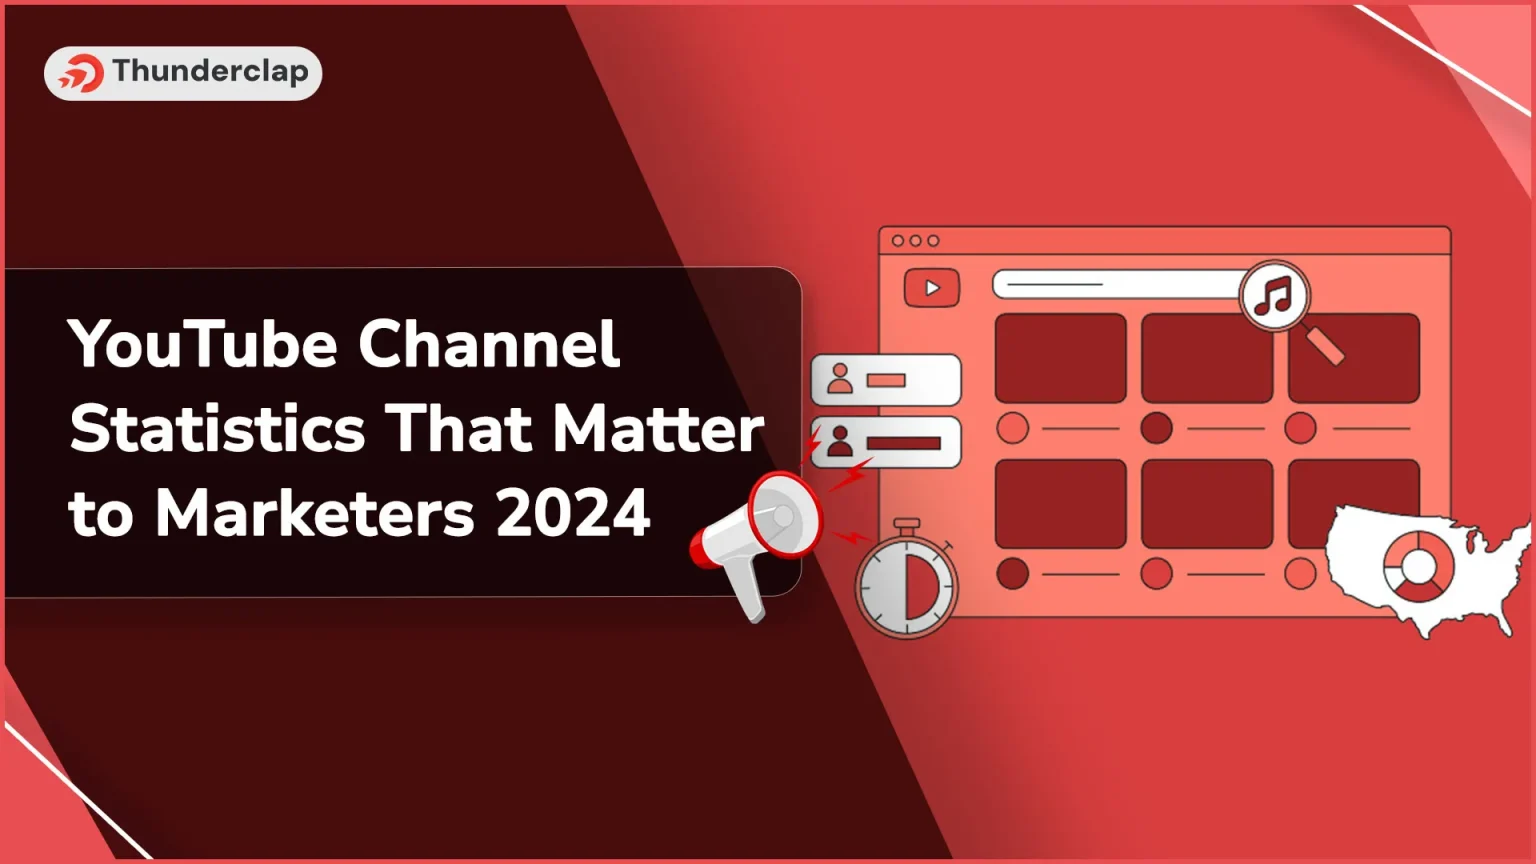 YouTube Channel Statistics That Matter to Marketers 2024